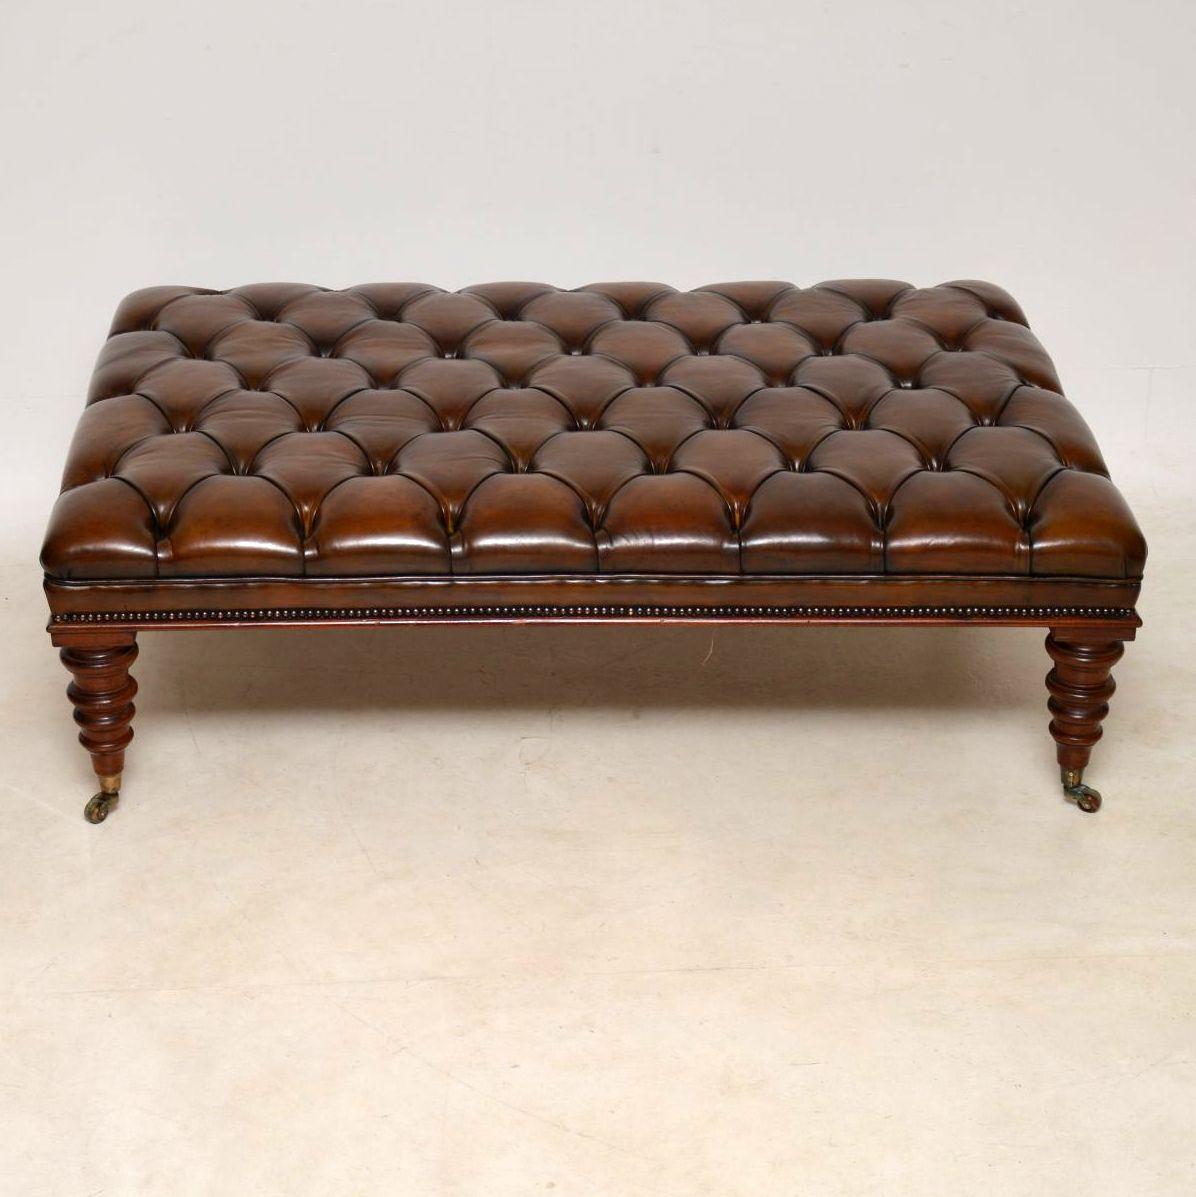 Very impressive large antique Victorian style deep buttoned leather stool or coffee table with a mahogany edge and sitting on well turned mahogany legs with brass cup casters, which have been antiqued. It has been beautifully re-upholstered, then